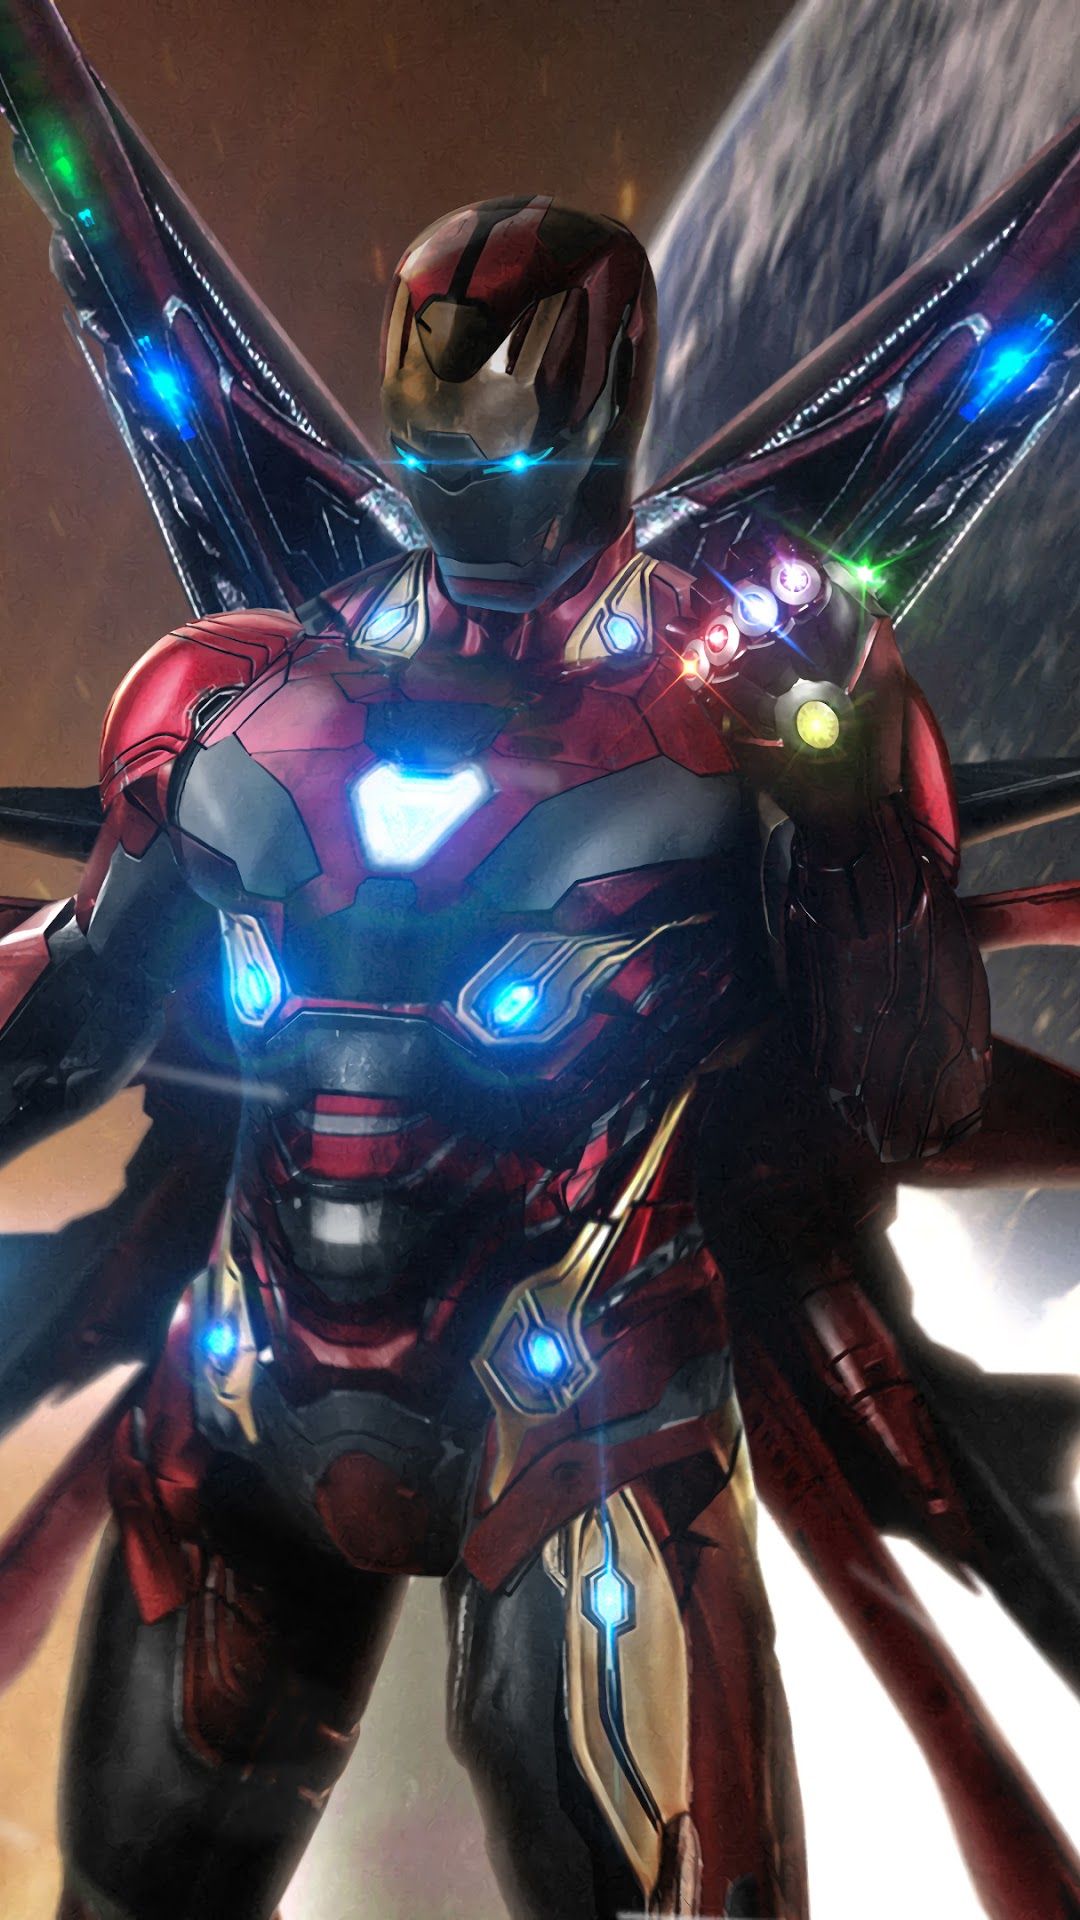 Iron Man, Infinity Stones, Avengers Endgame, 4K phone HD Wallpaper, Image, Background, Photo and Picture. Mocah HD Wallpaper